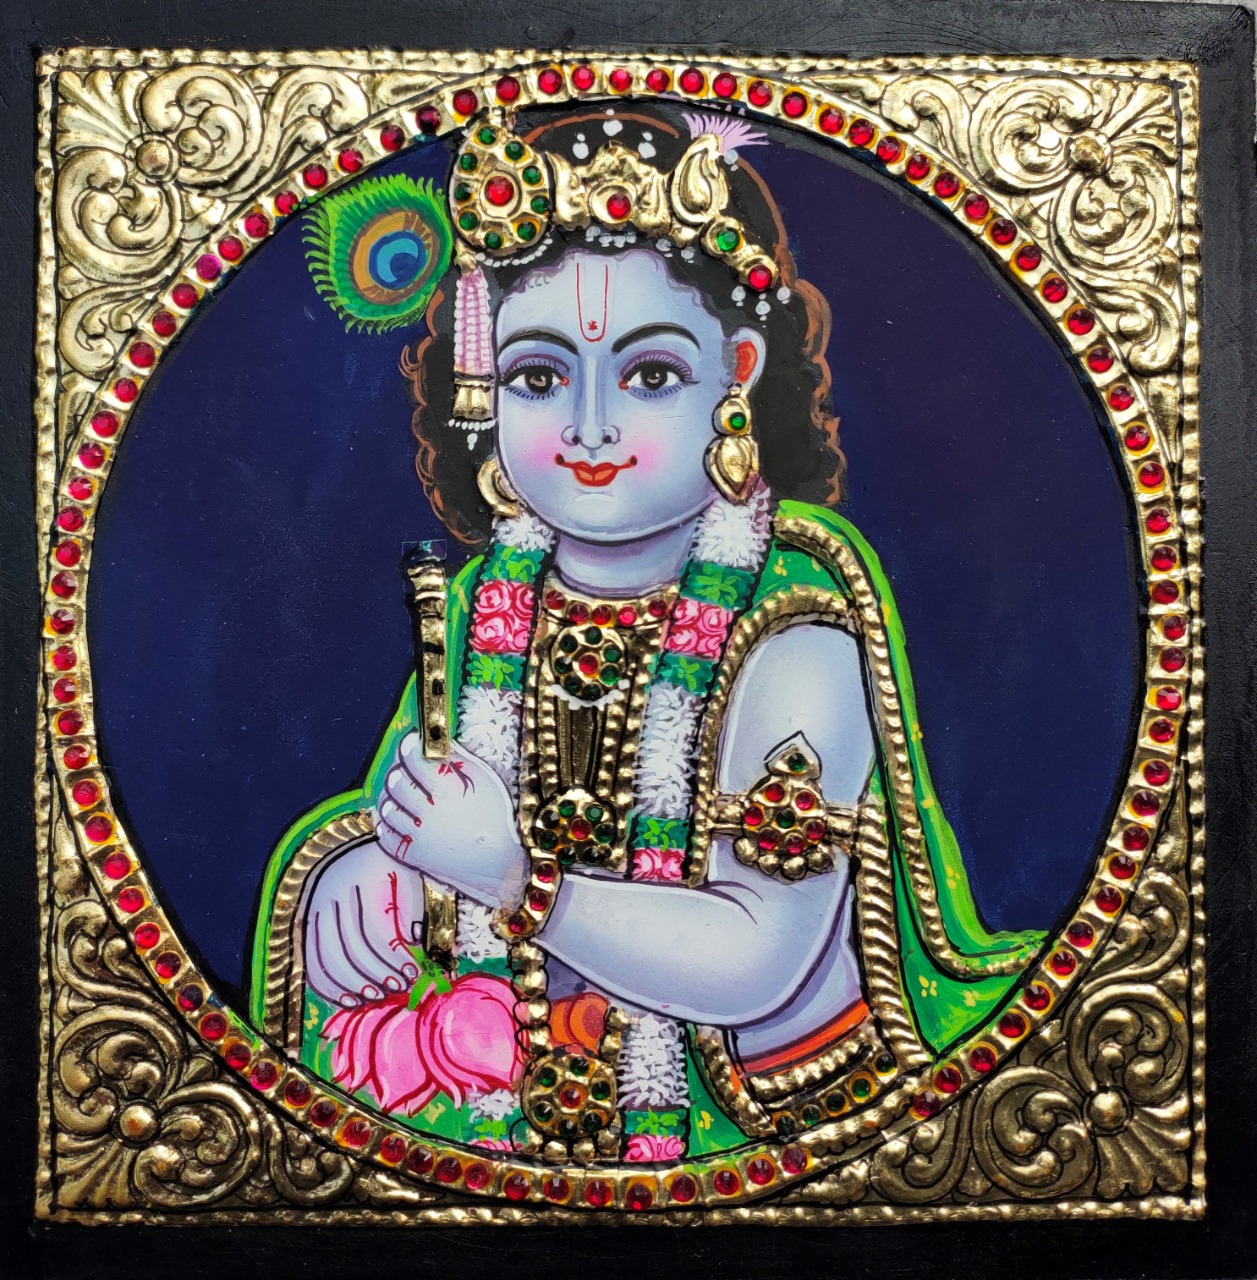 Lord Krishna With flute - Tanjore Painting (10 x 10 inches ...